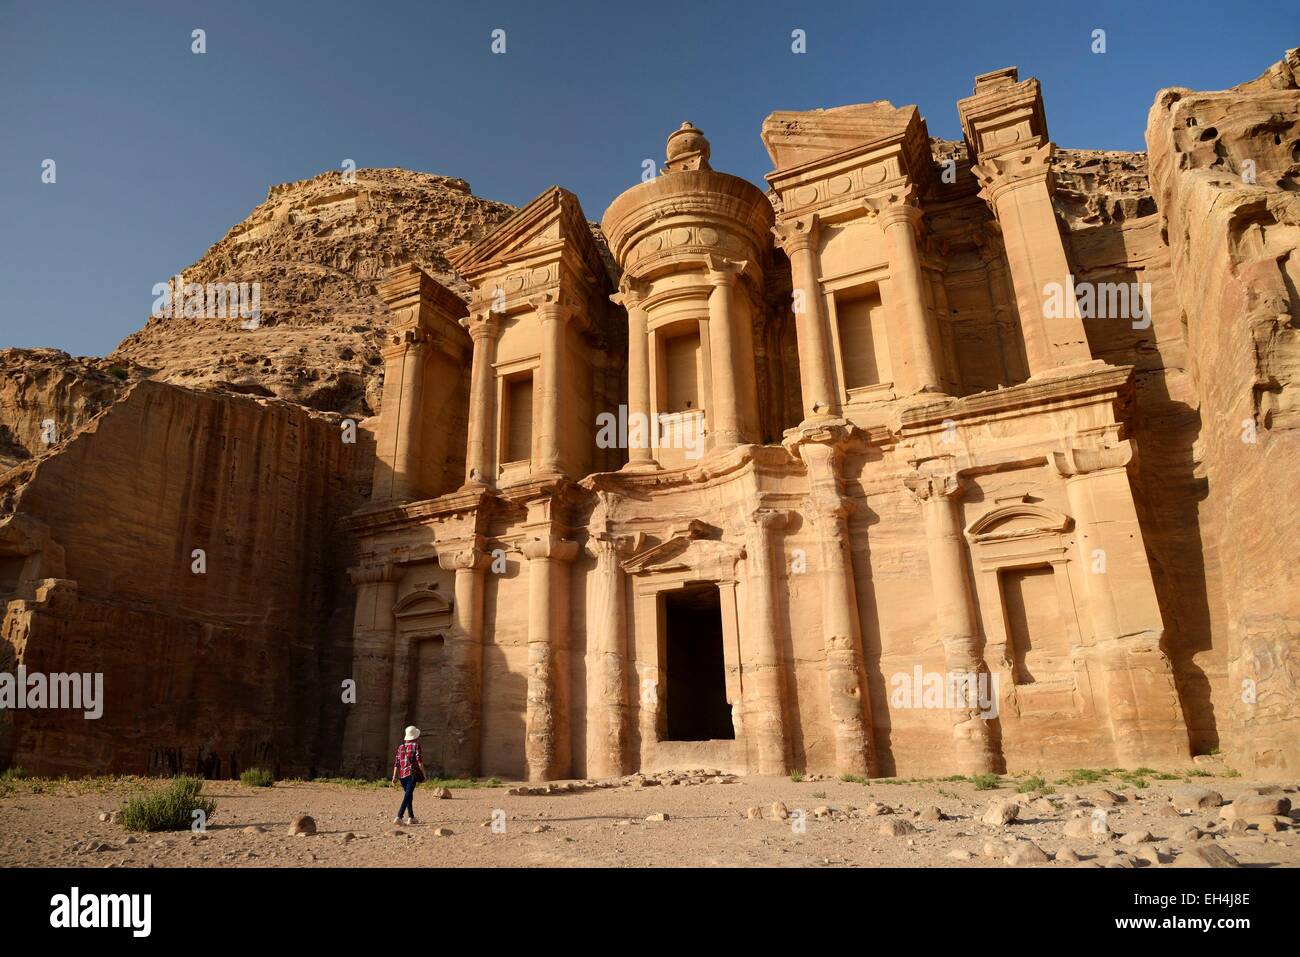 Jordan, Nabataean archeological site of Petra, listed as World Heritage by  UNESCO, the famous and elaborately